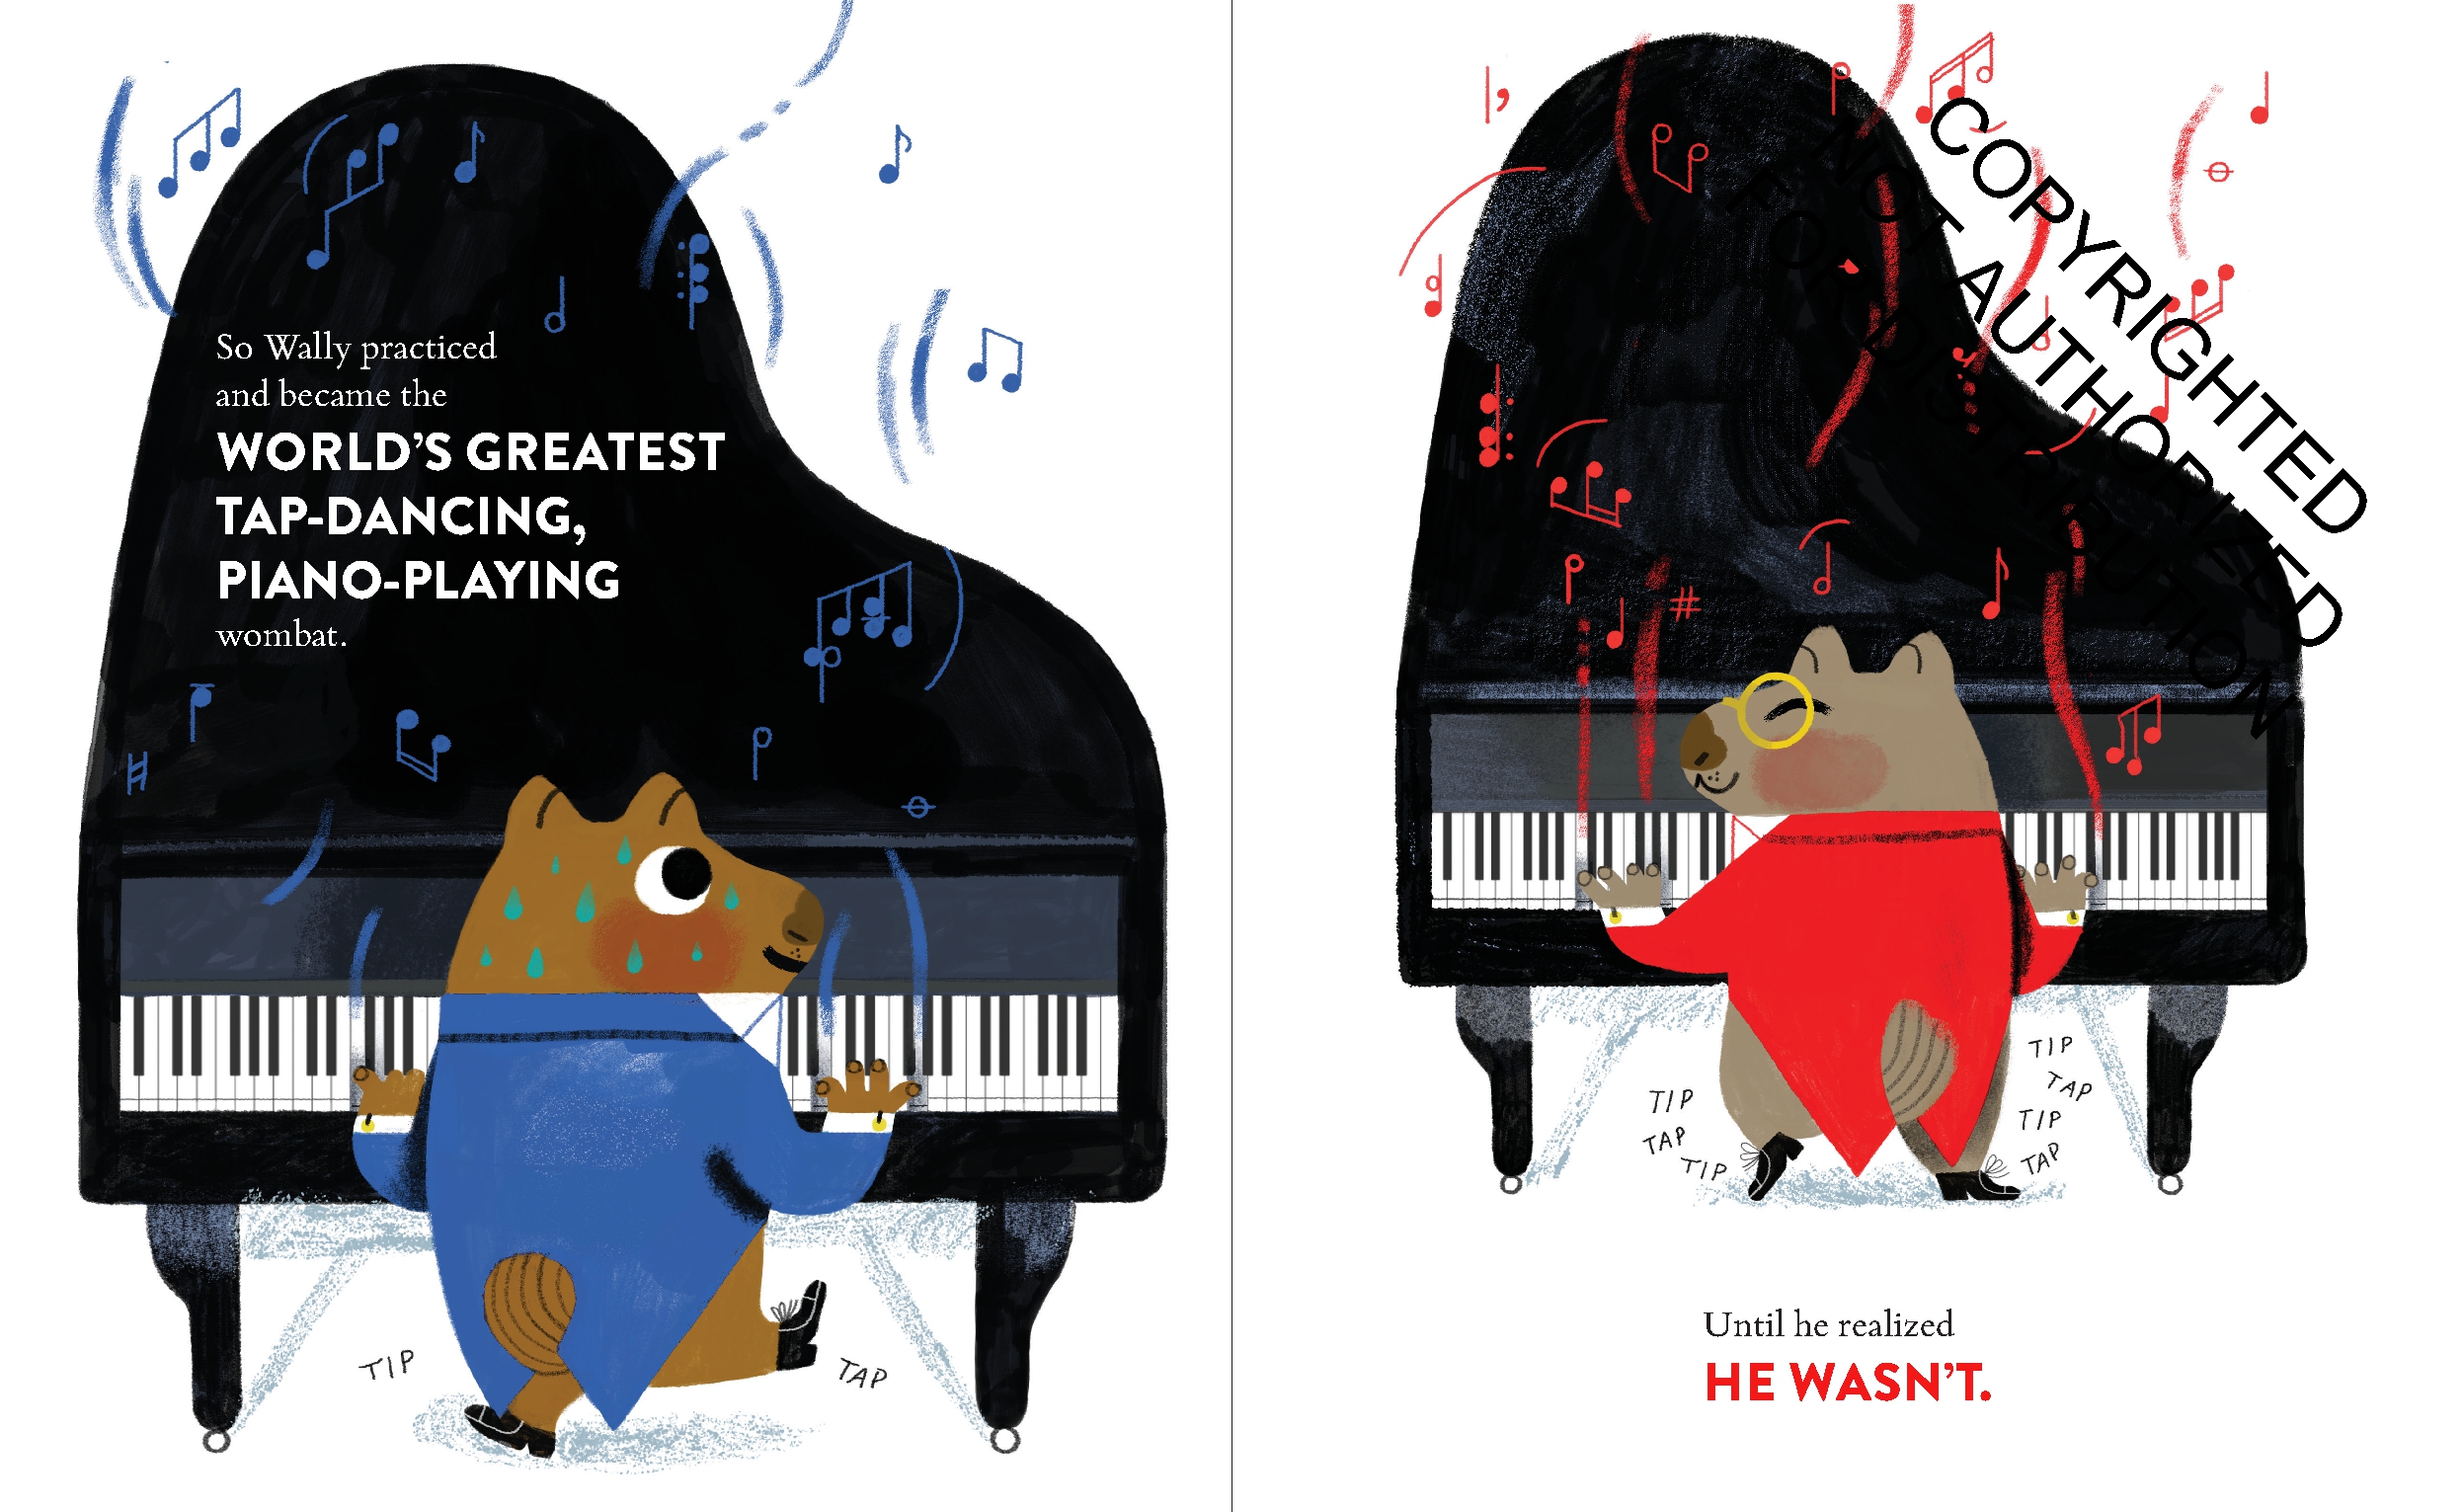 Wally the World's Greatest Piano-Playing Wombat